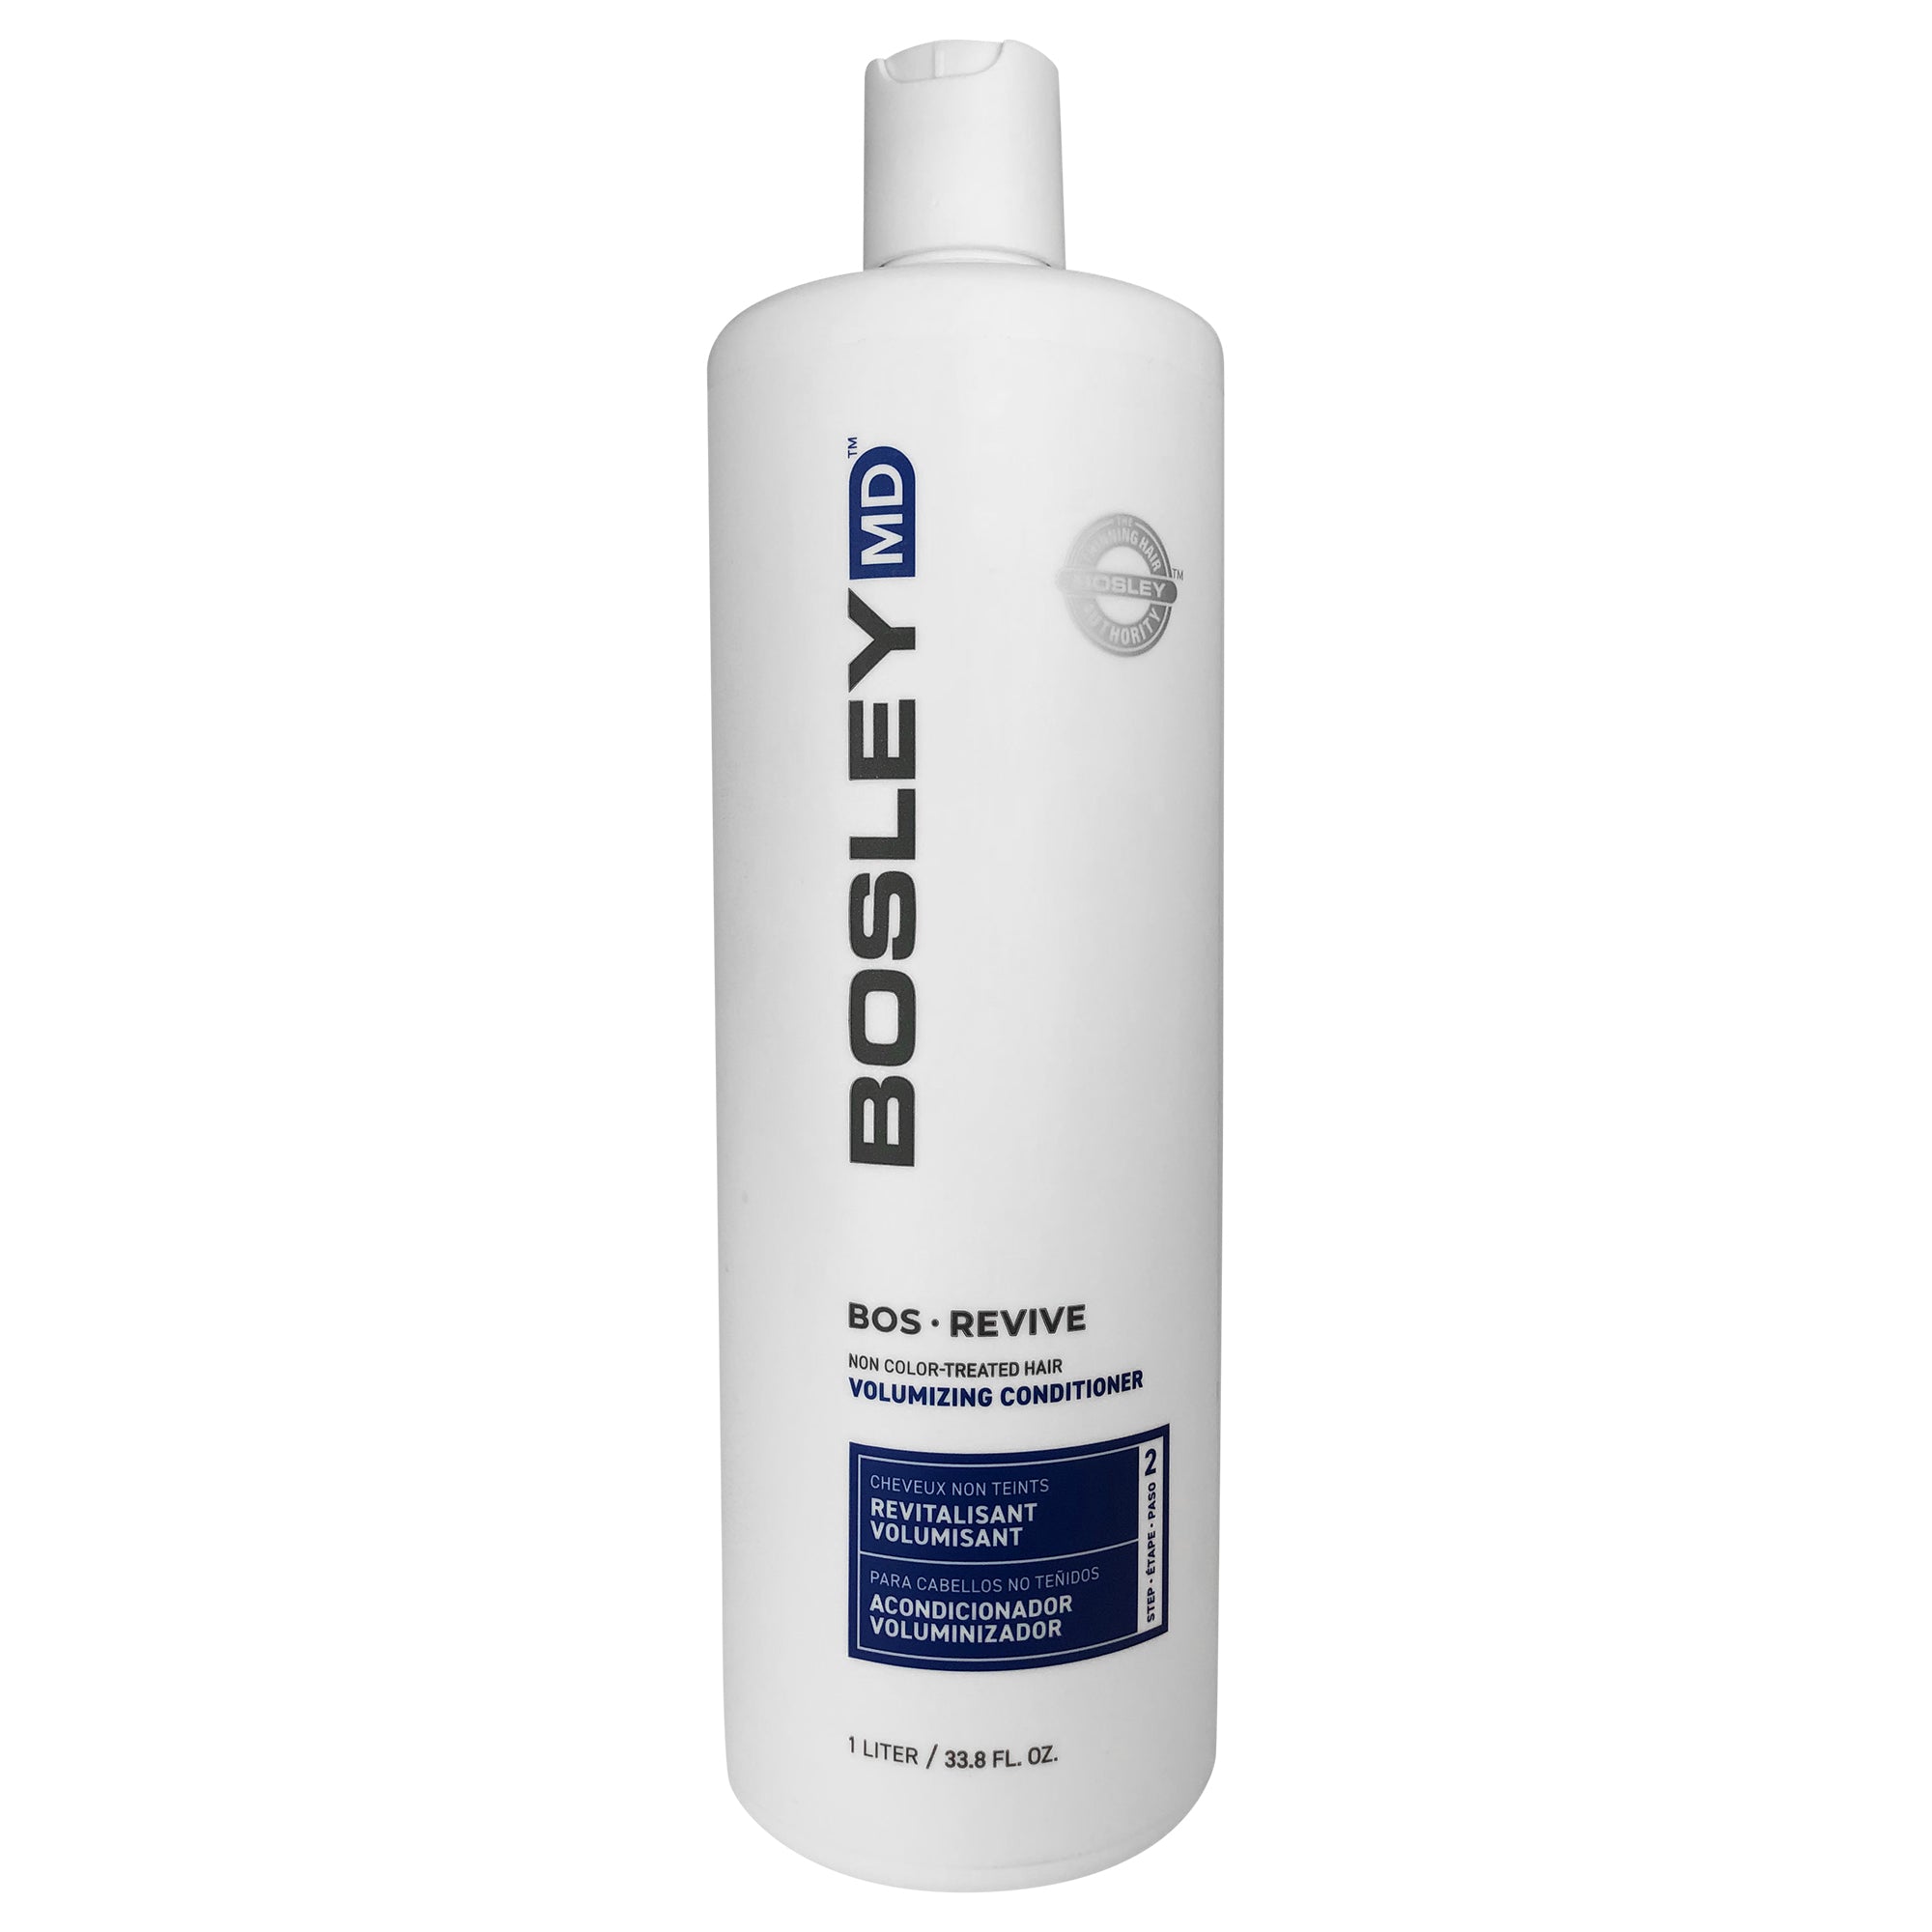 Bosley MD BosRevive Non Color-Treated Hair Volumizing Conditioner